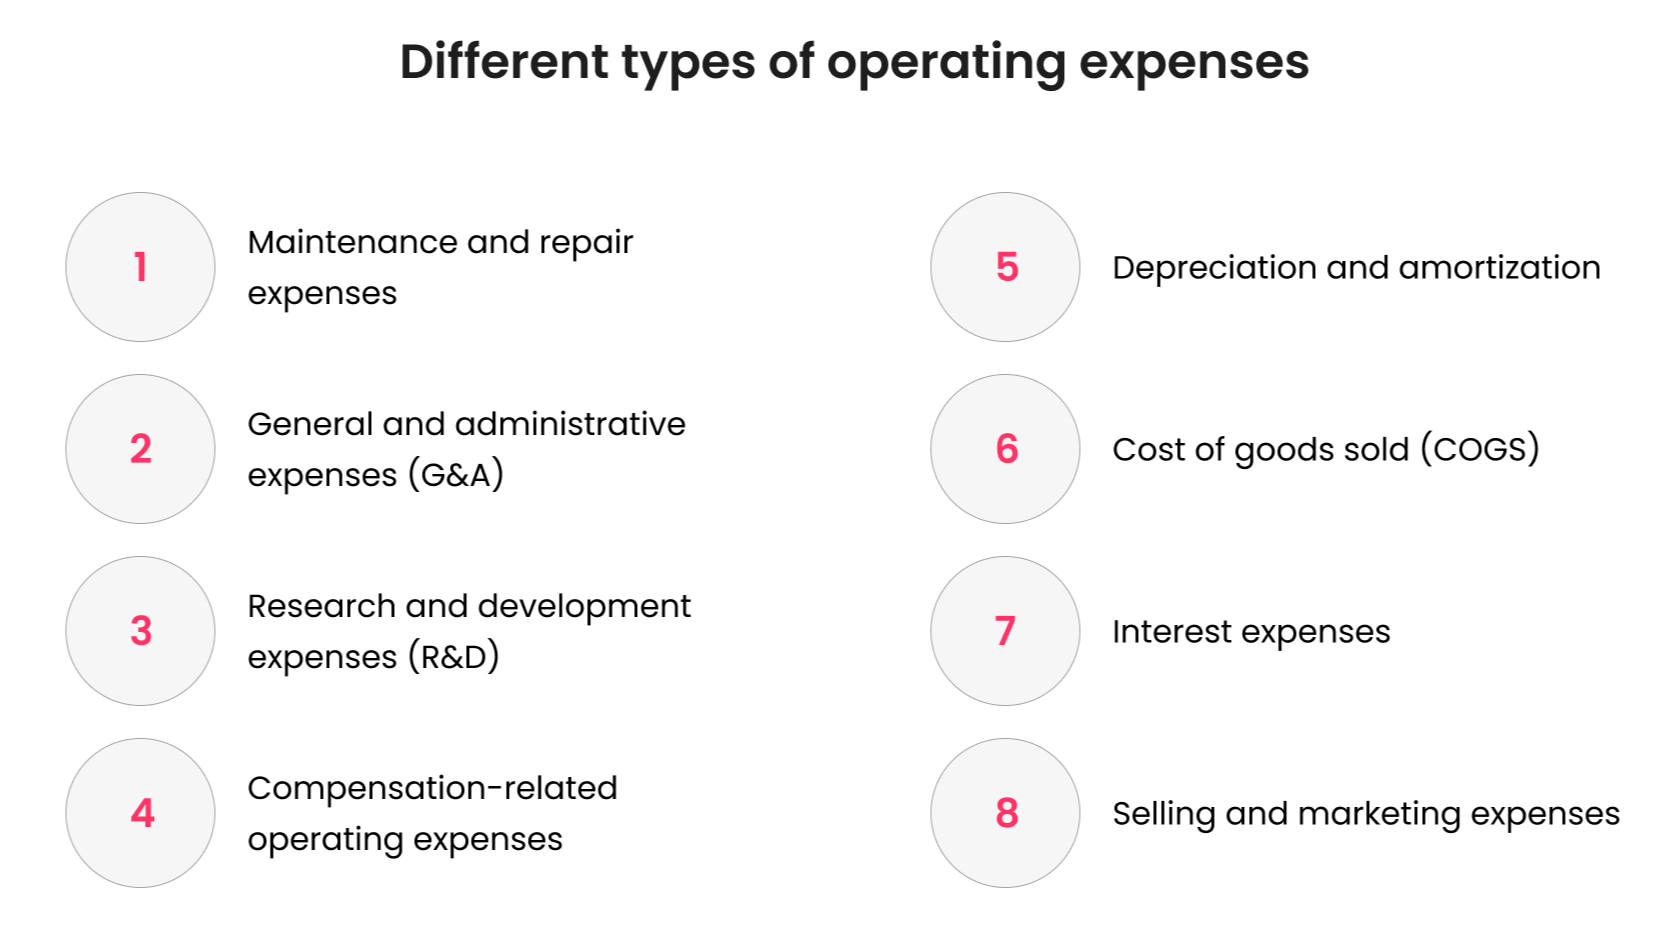 Different types of operating expenses